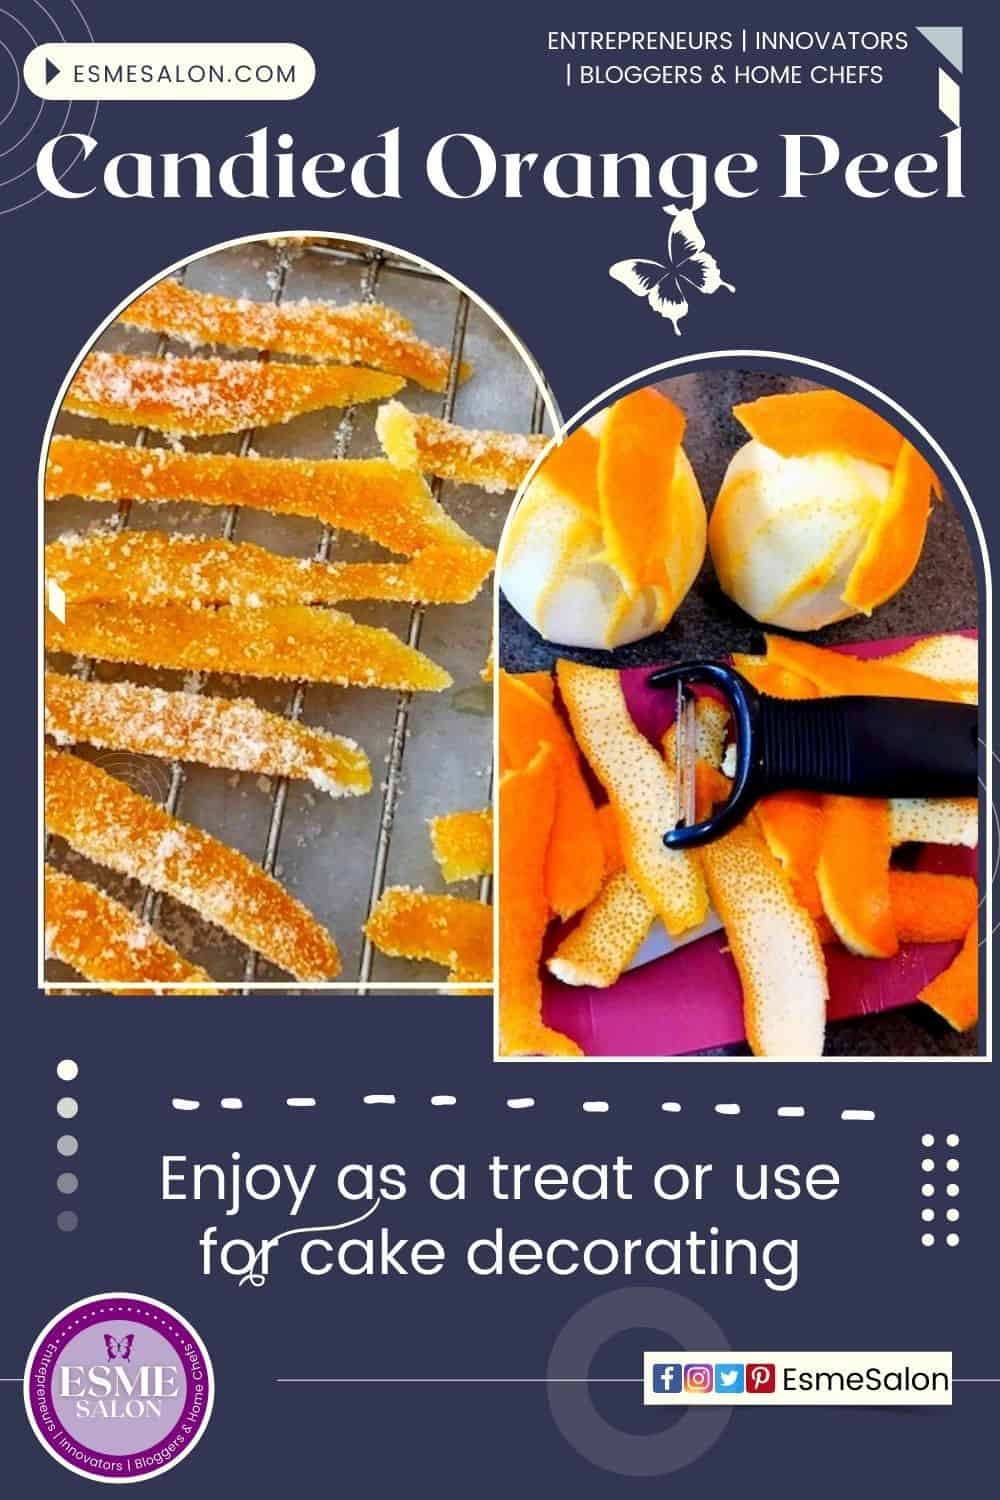 Easy Candied Orange Peel cooked in sugar syrup and dropped in sugar crystals for a sweet treat or used as part of decorating a cake